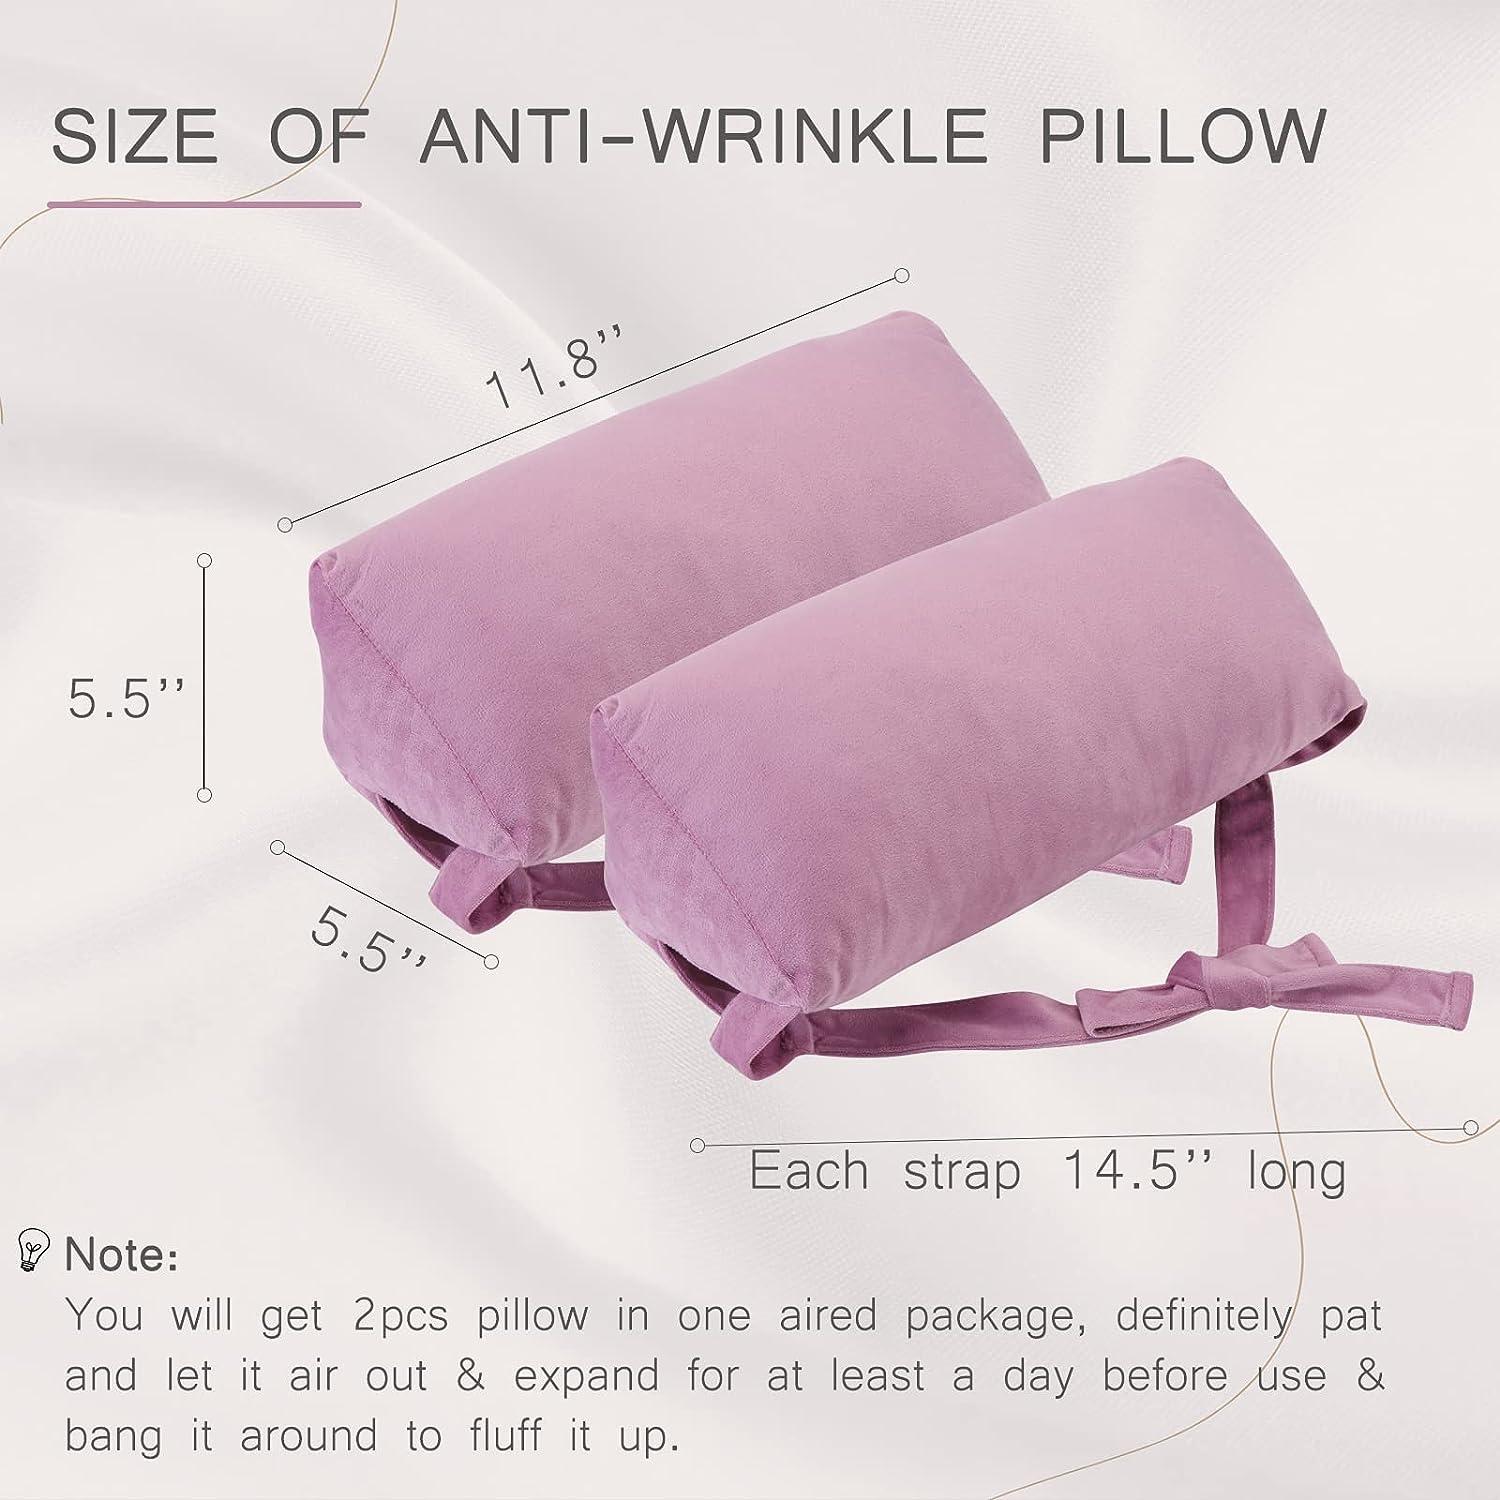 Can a Pillow Really Help Prevent Wrinkles?